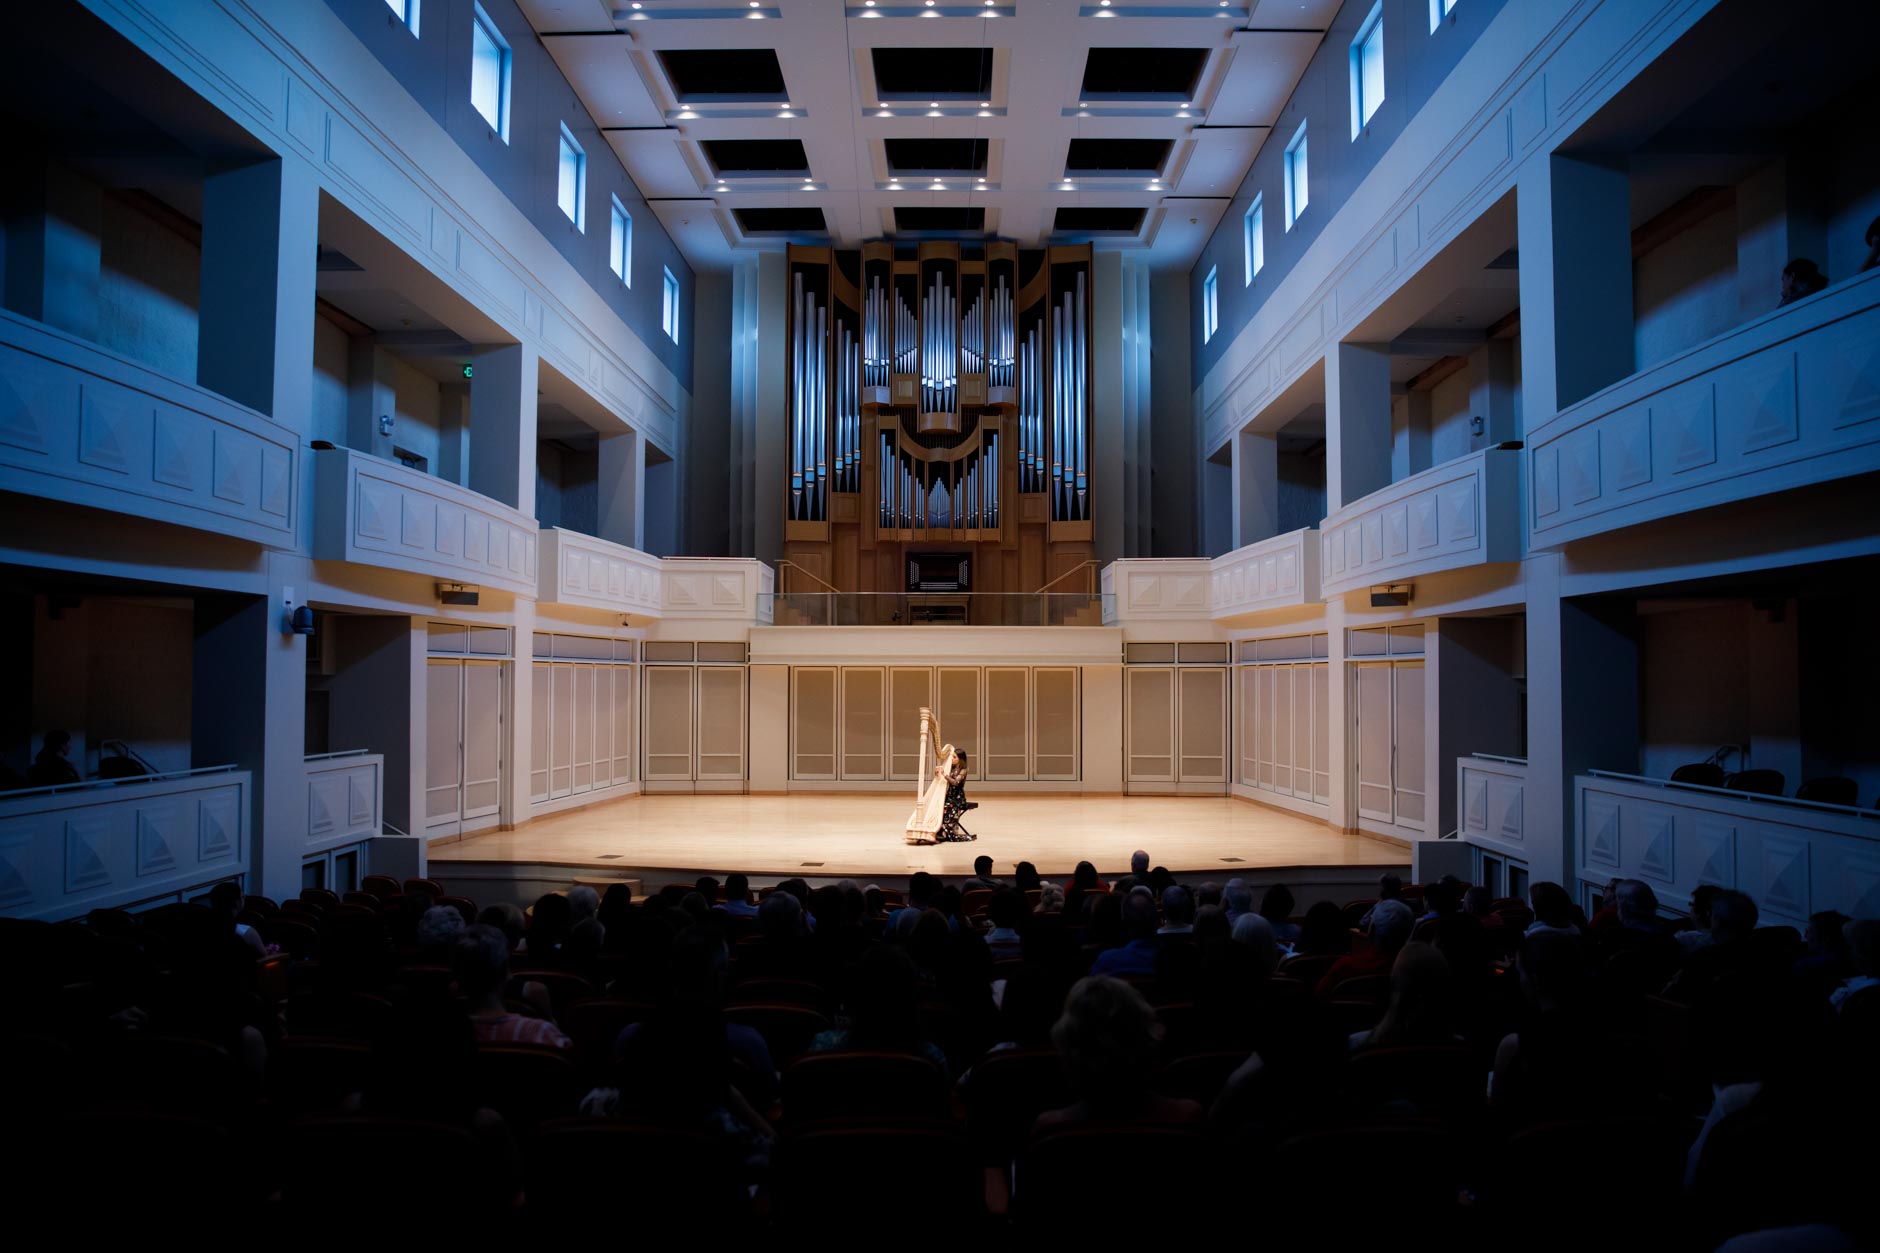 Harpist Katherine Siochi performs during her laureate recital at the 11th USA International Harp Competition at Indiana University in Bloomington, Indiana on Friday, July 5, 2019. (Photo by James Brosher)